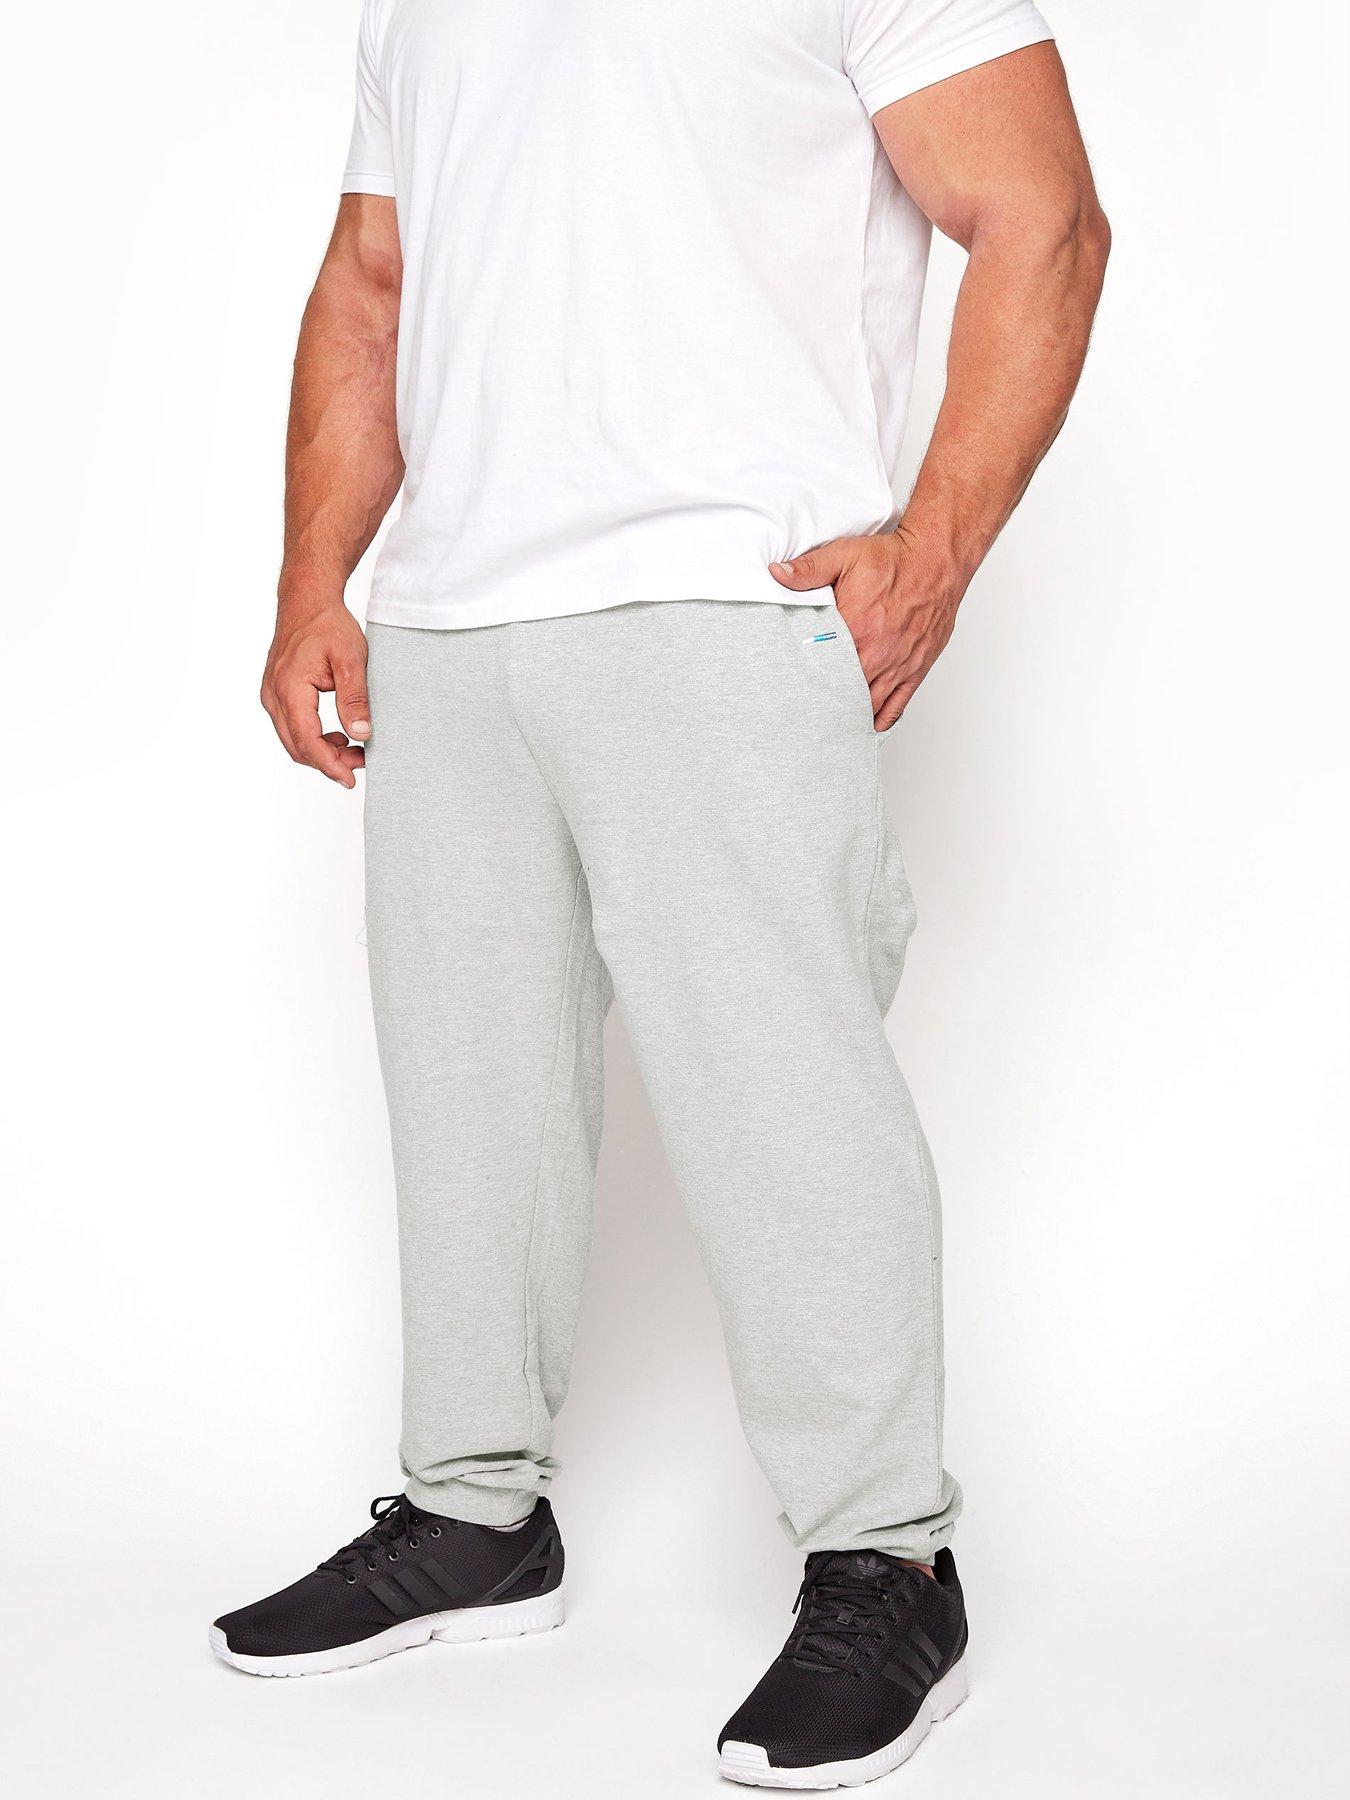 Details about  / New Mens Club Room Classic Joggers Sweatpants Casual £42 XL 2XL Tracksuit Bottom